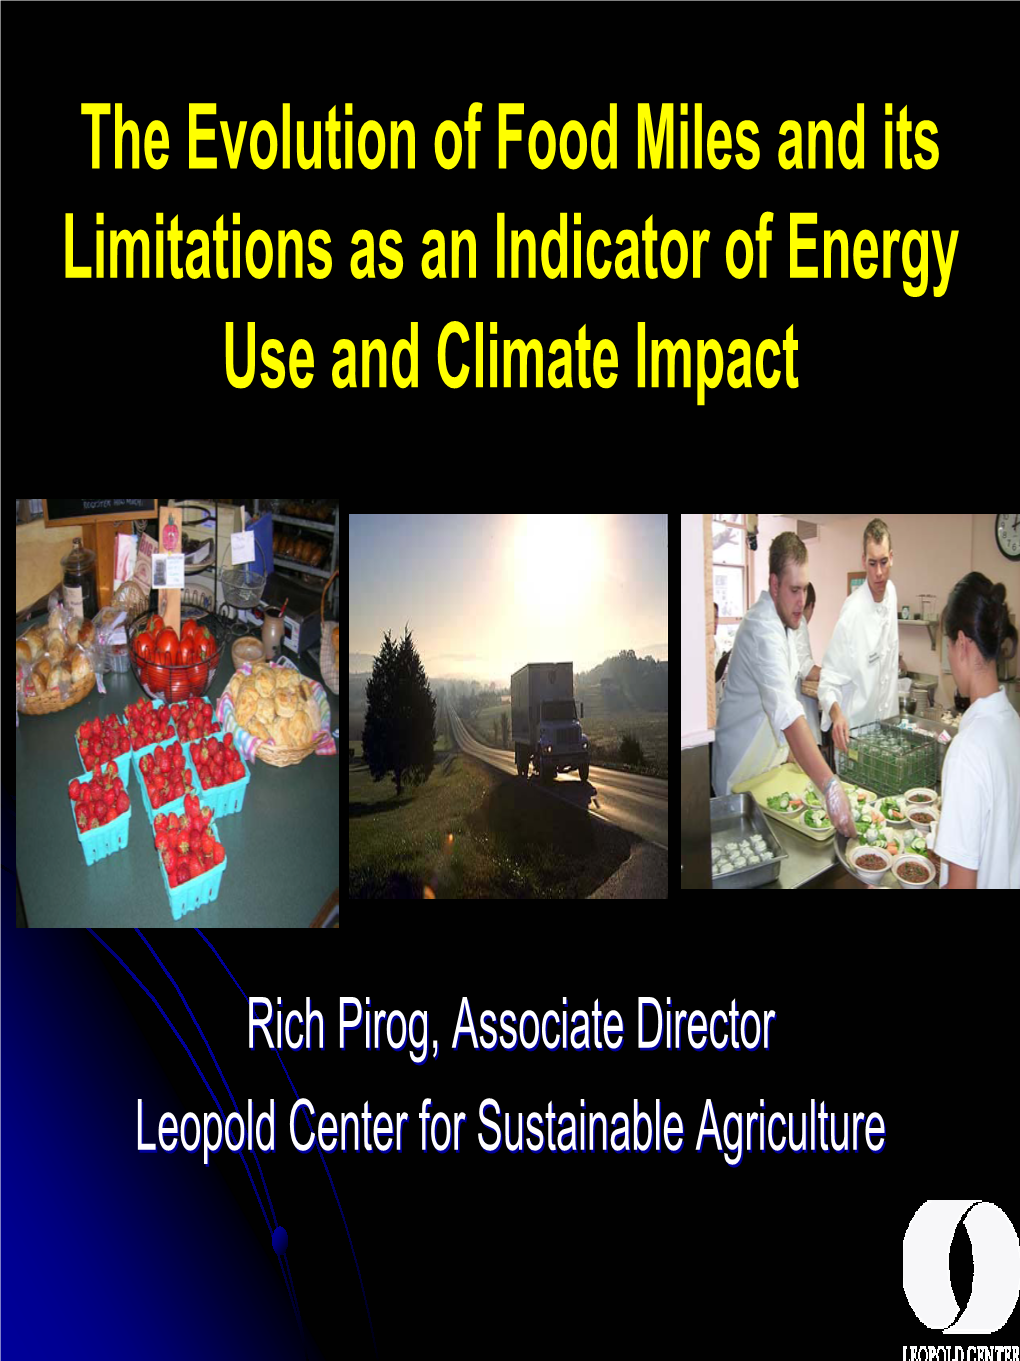 The Evolution of Food Miles and Its Limitations As an Indicator of Energy Use and Climate Impact